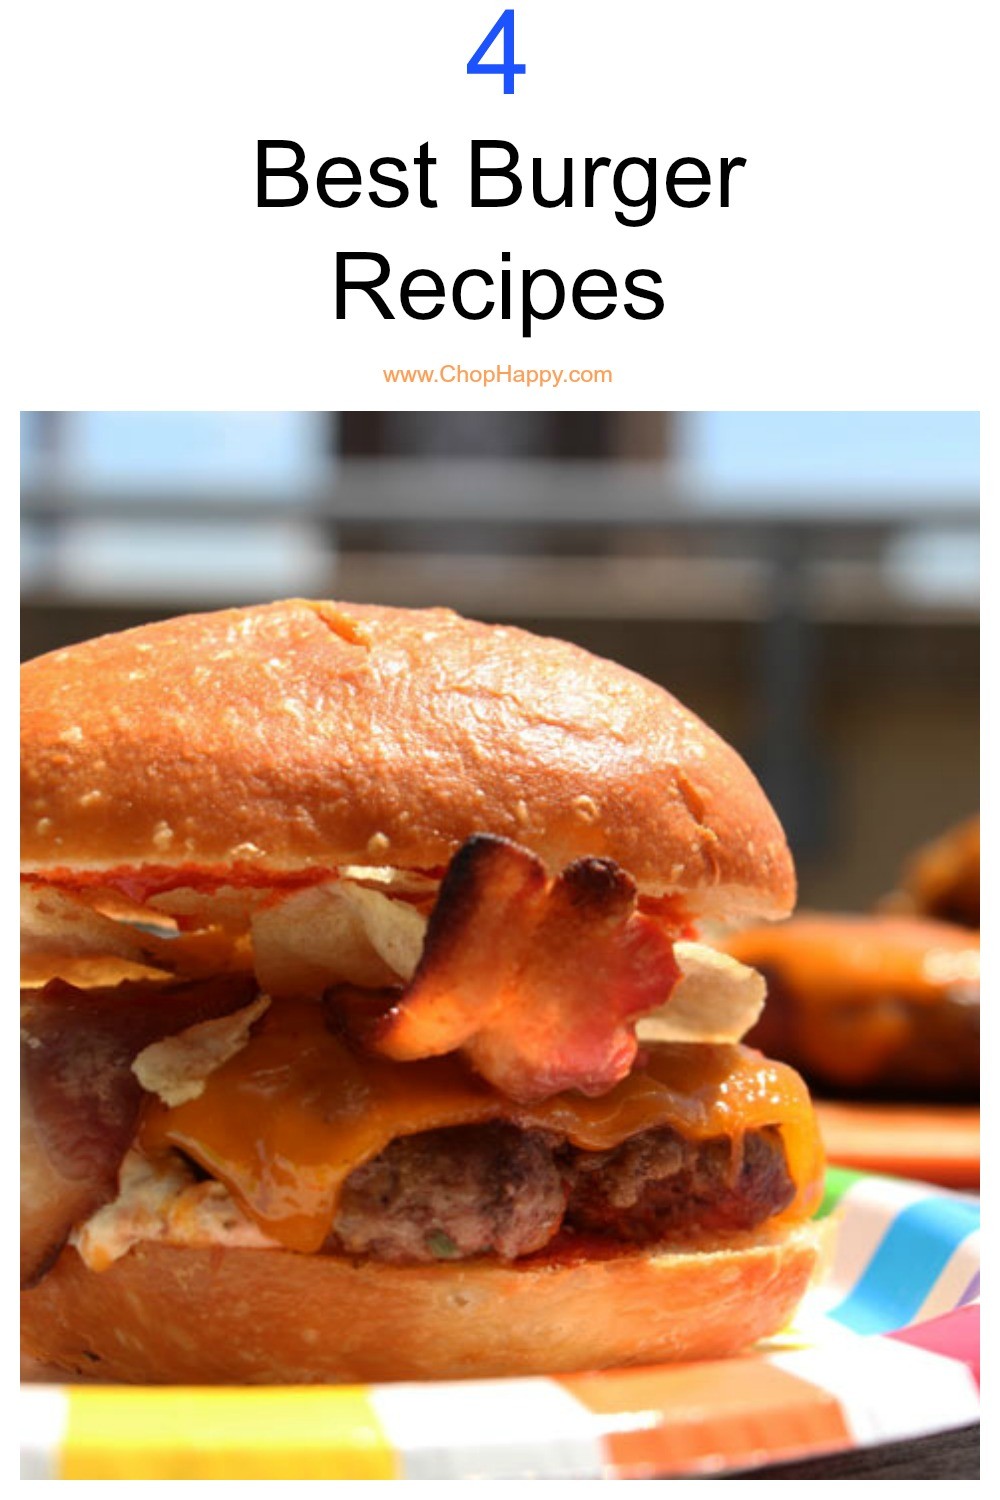 Top 4 Best Burger Recipes that you will want to grill. Jalapeno popper burger, spinach dip burger, bacon burger, and spicy burger recipes. Happy cooking! www.ChopHappy.com! #burger #bestburger #cheeseburger 